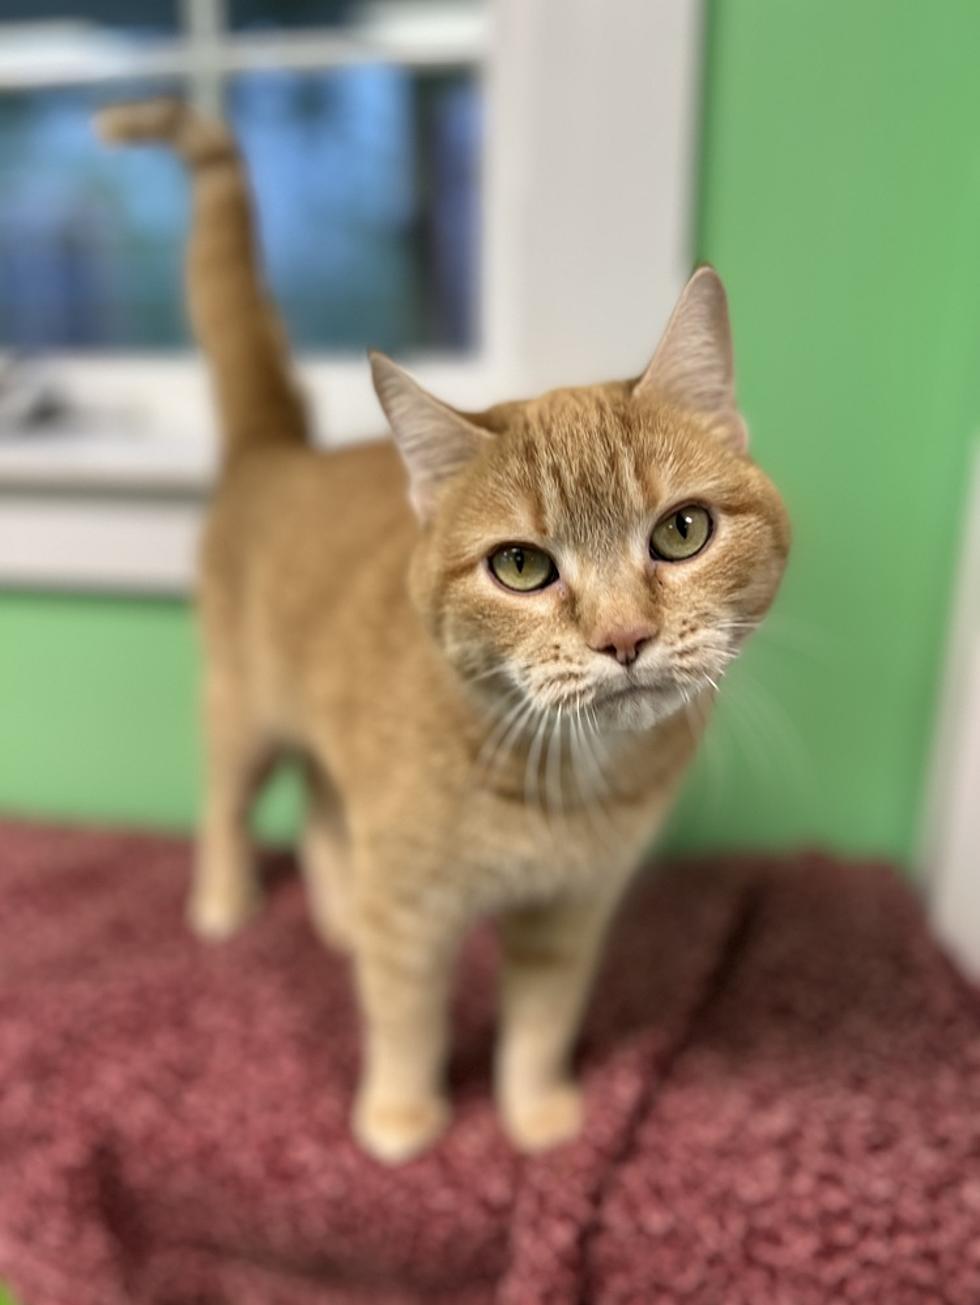 Our Hancock County SPCA “Pet Of The Week” Is Todd, the girl kitty